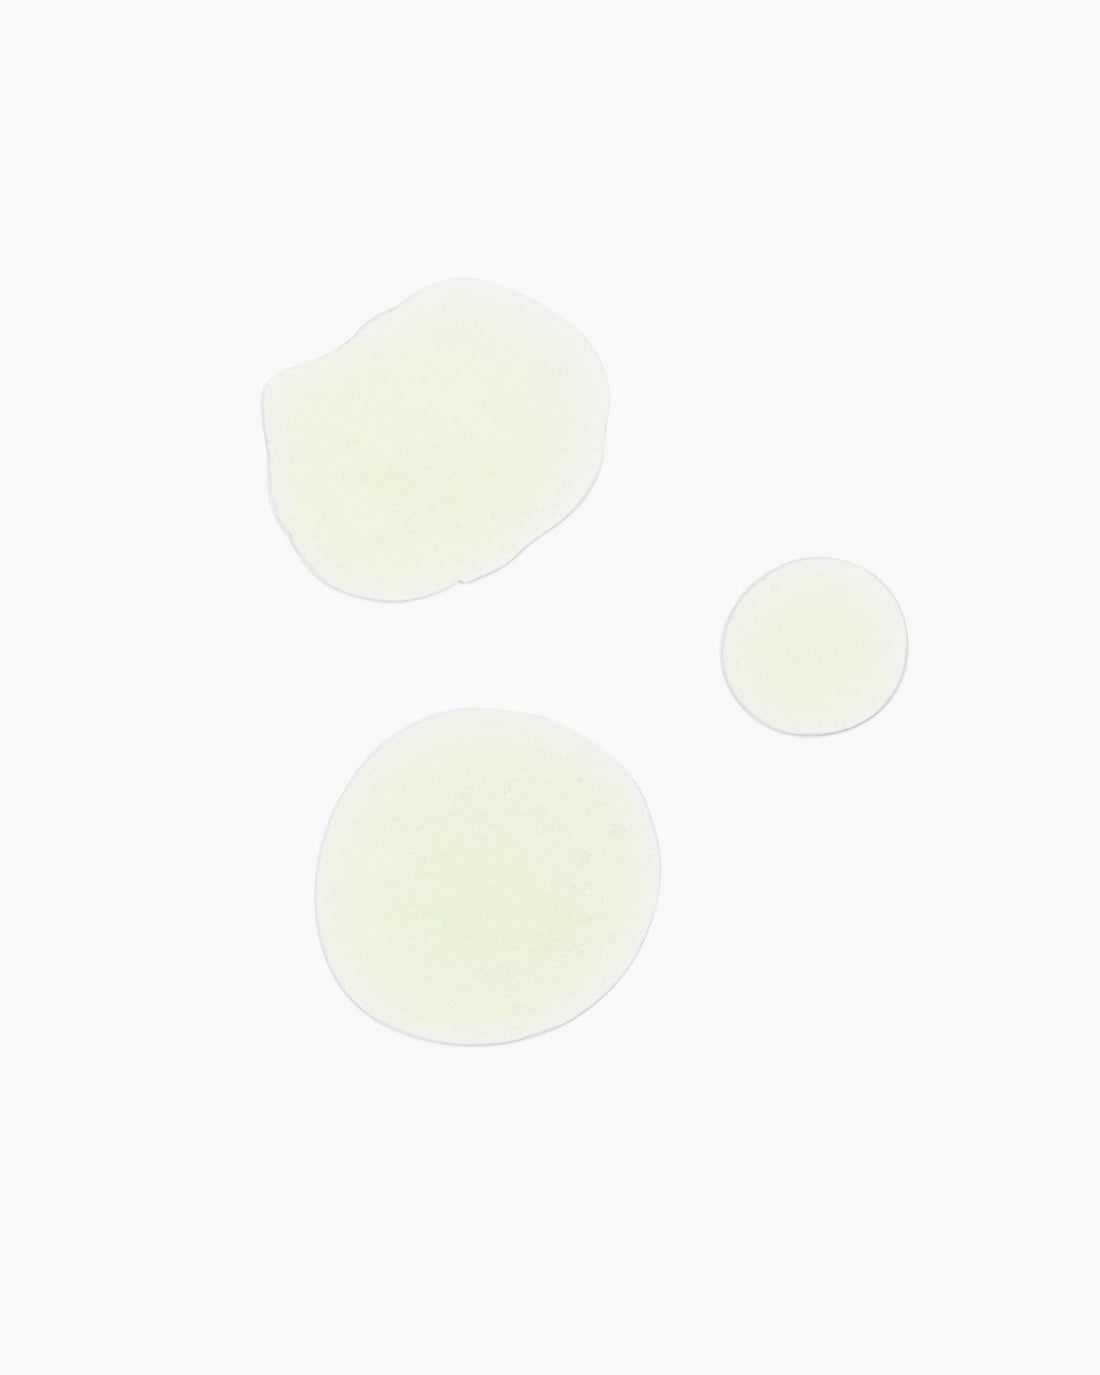 2% Encapsulated Retinol Skin Booster Droplets - Fig Face